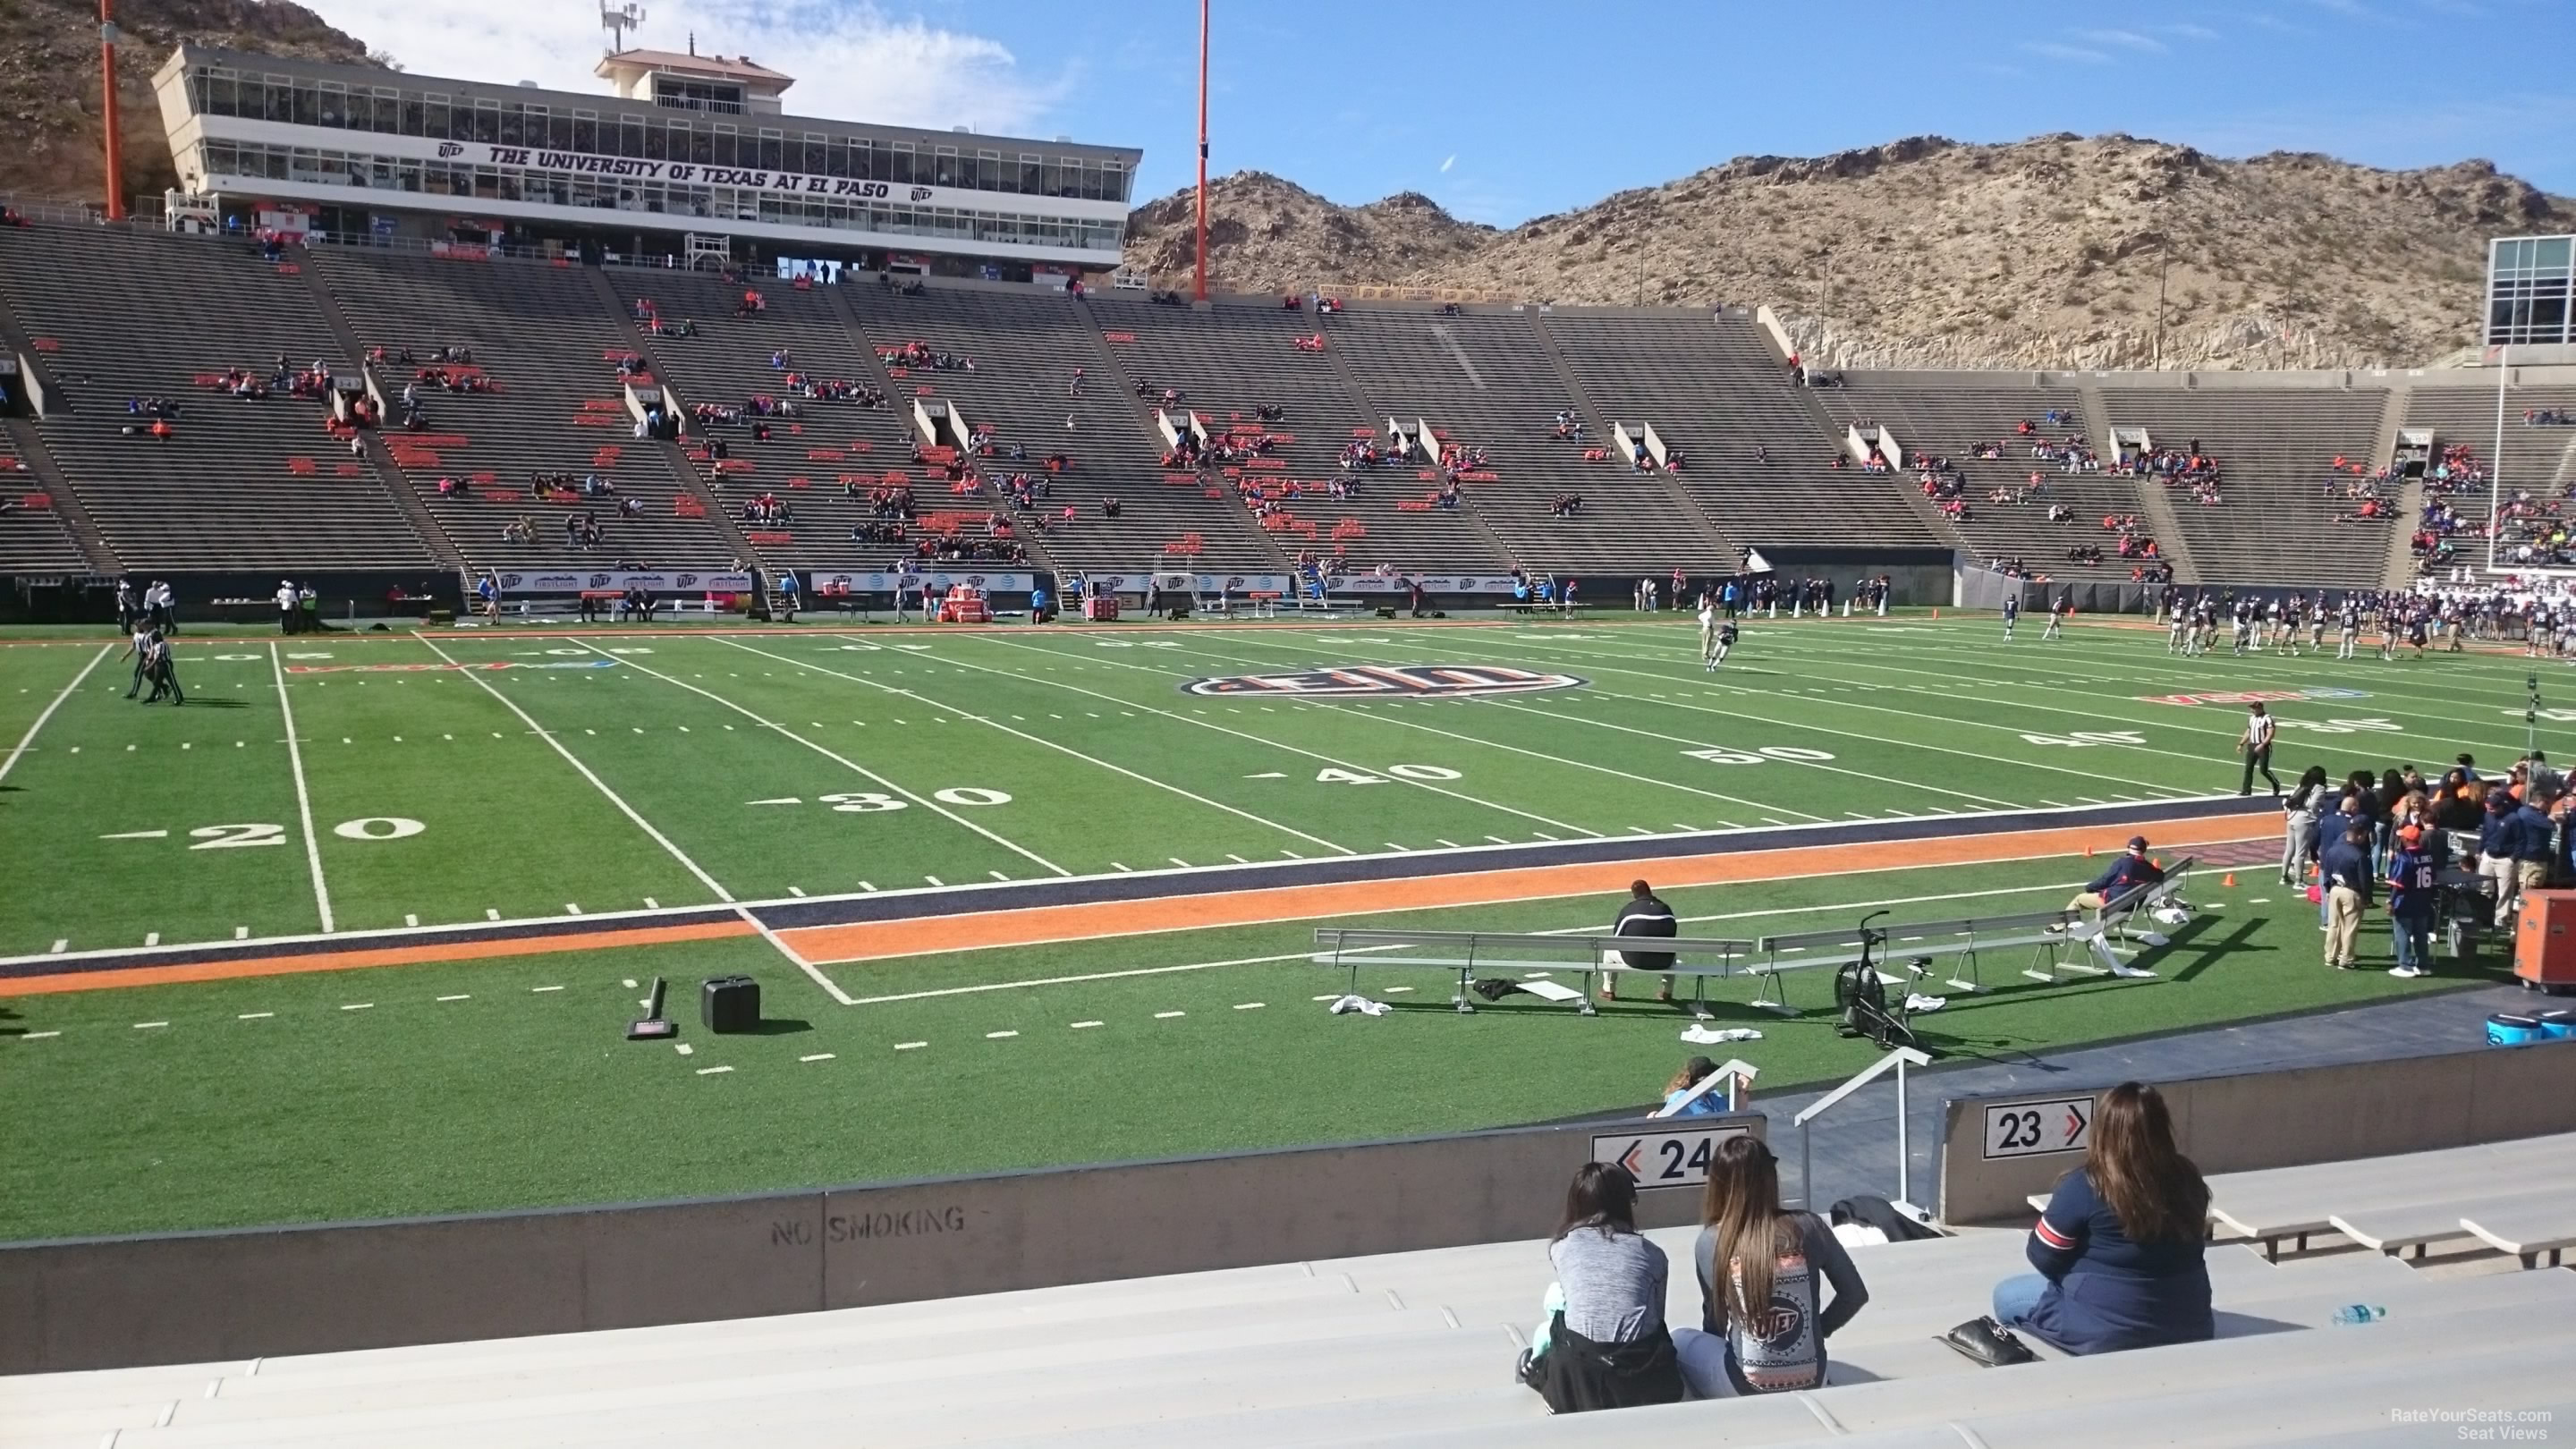 section 24, row 15 seat view  for football - sun bowl